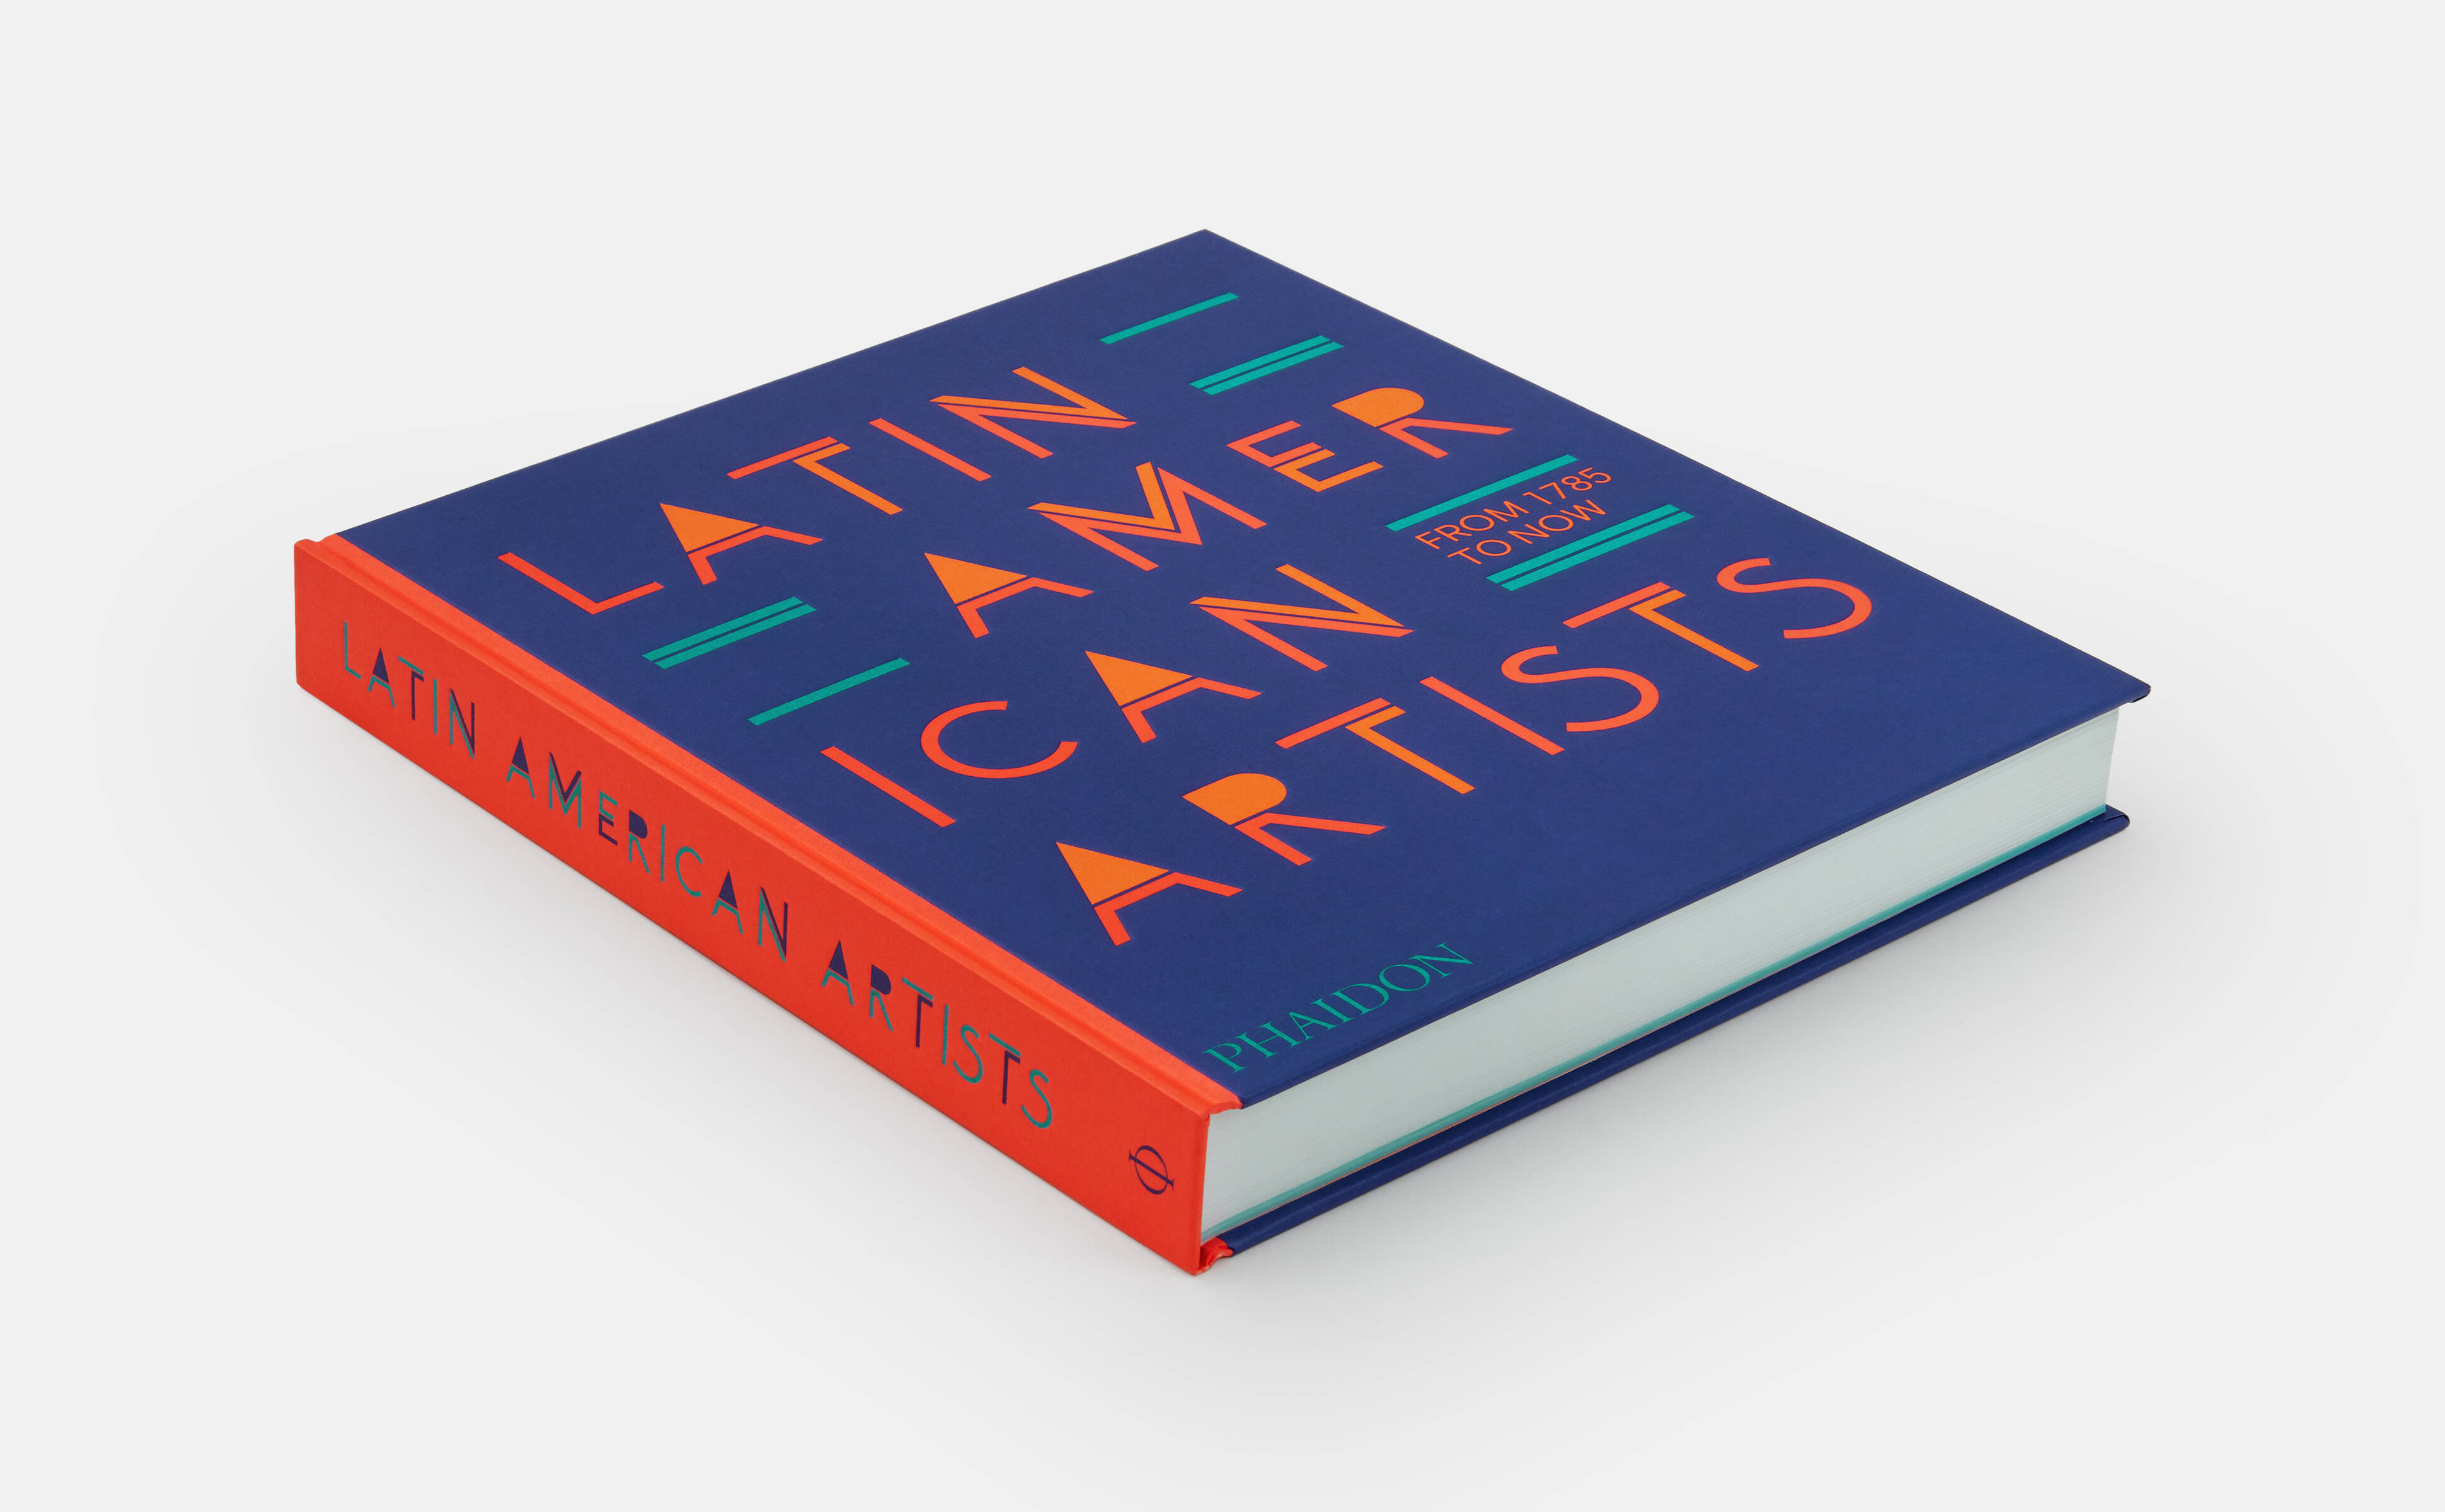 Latin American Artists and Power